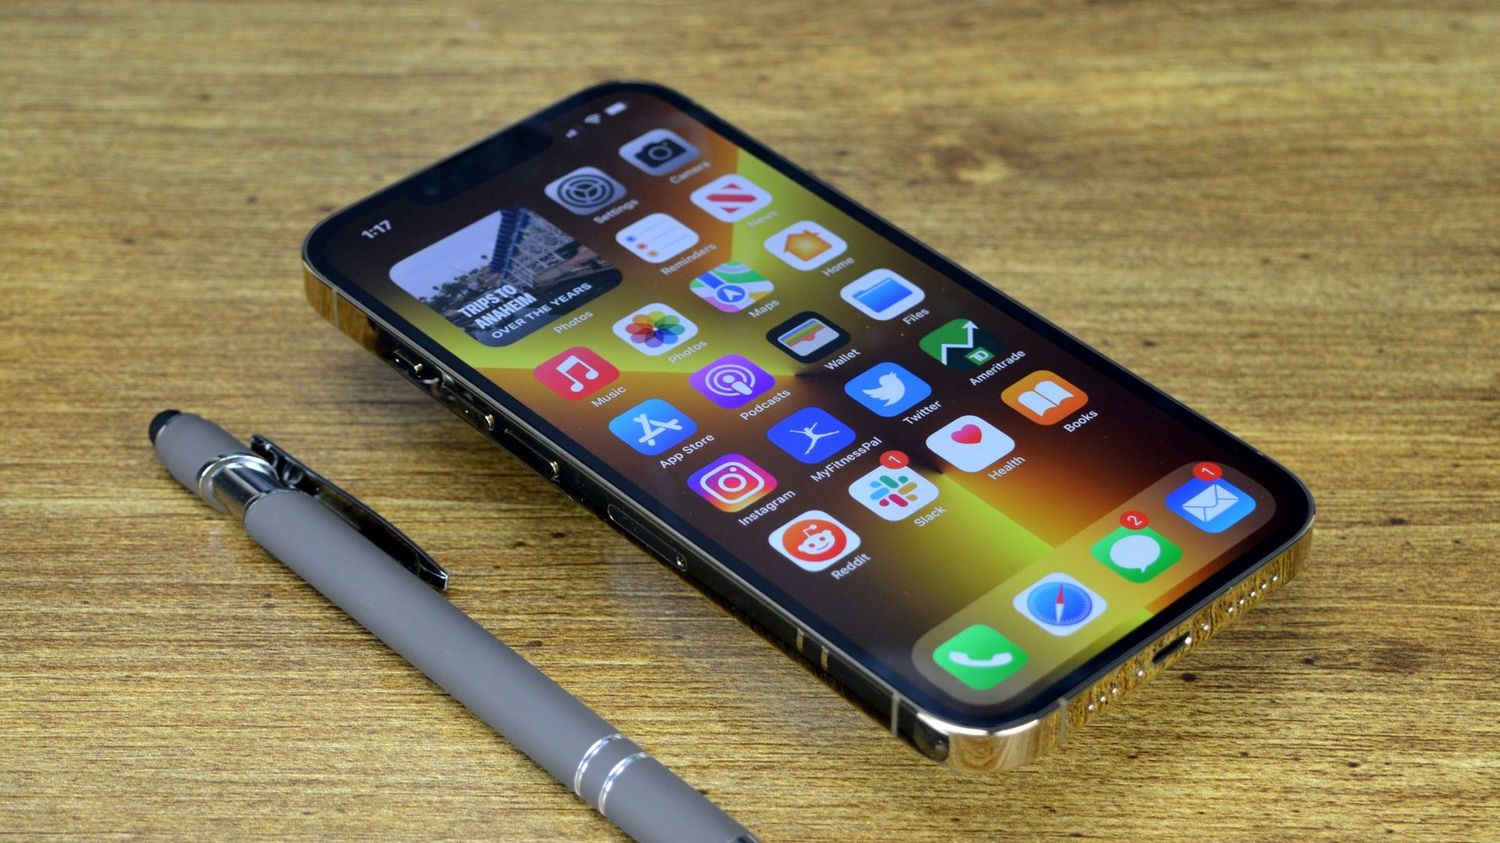 steve-jobs-was-wrong-having-a-stylus-for-your-phone-is-great